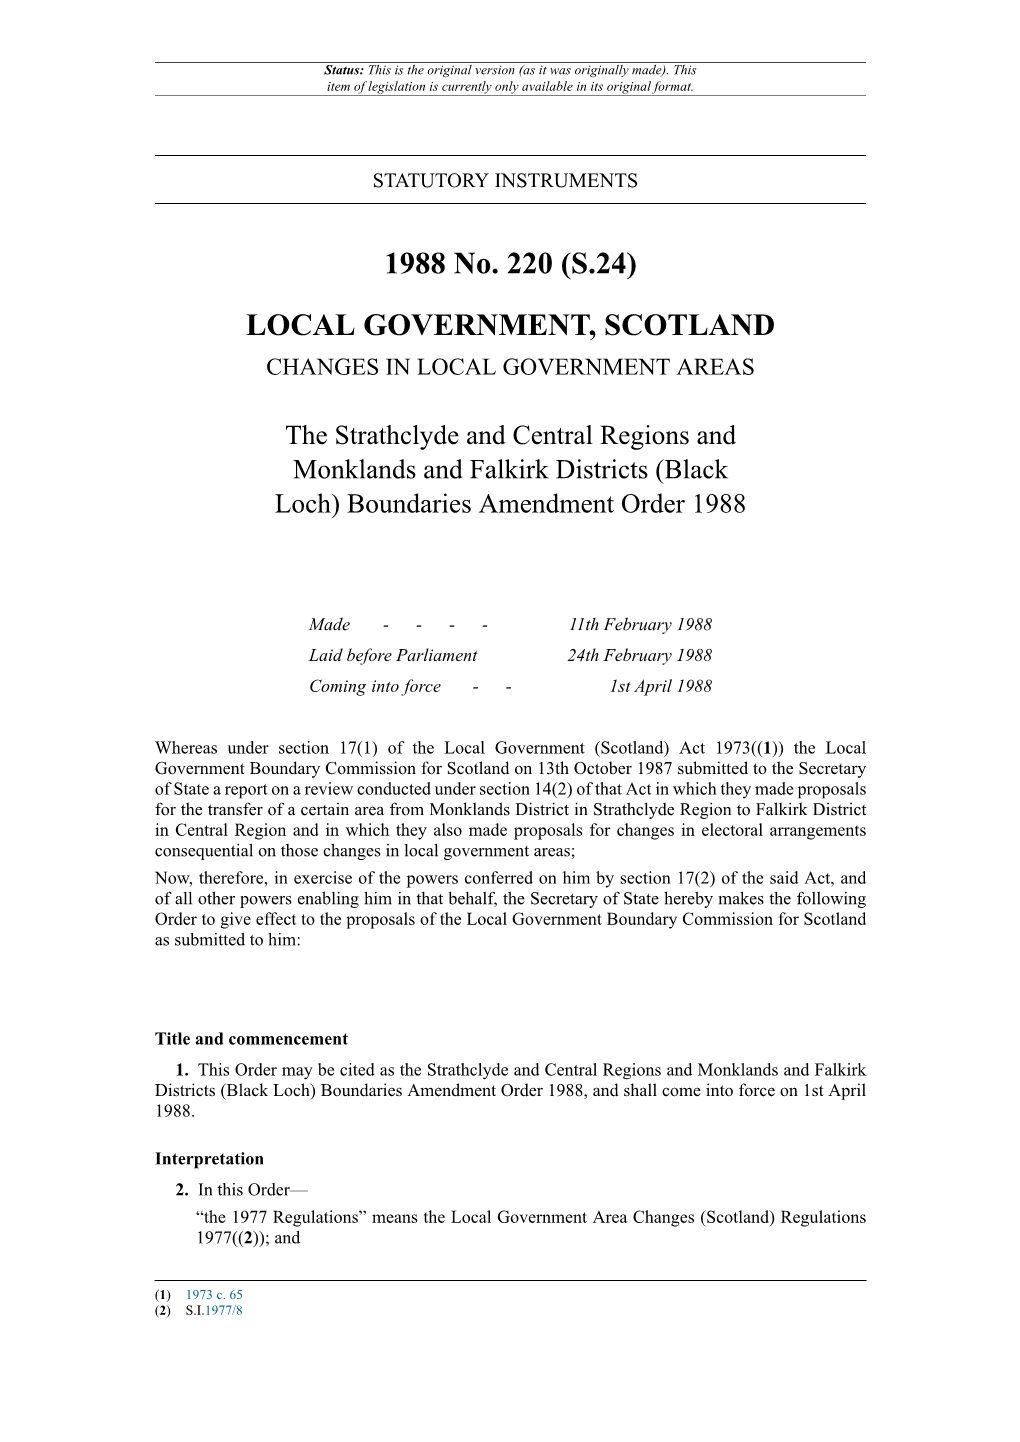 The Strathclyde and Central Regions and Monklands and Falkirk Districts (Black Loch) Boundaries Amendment Order 1988